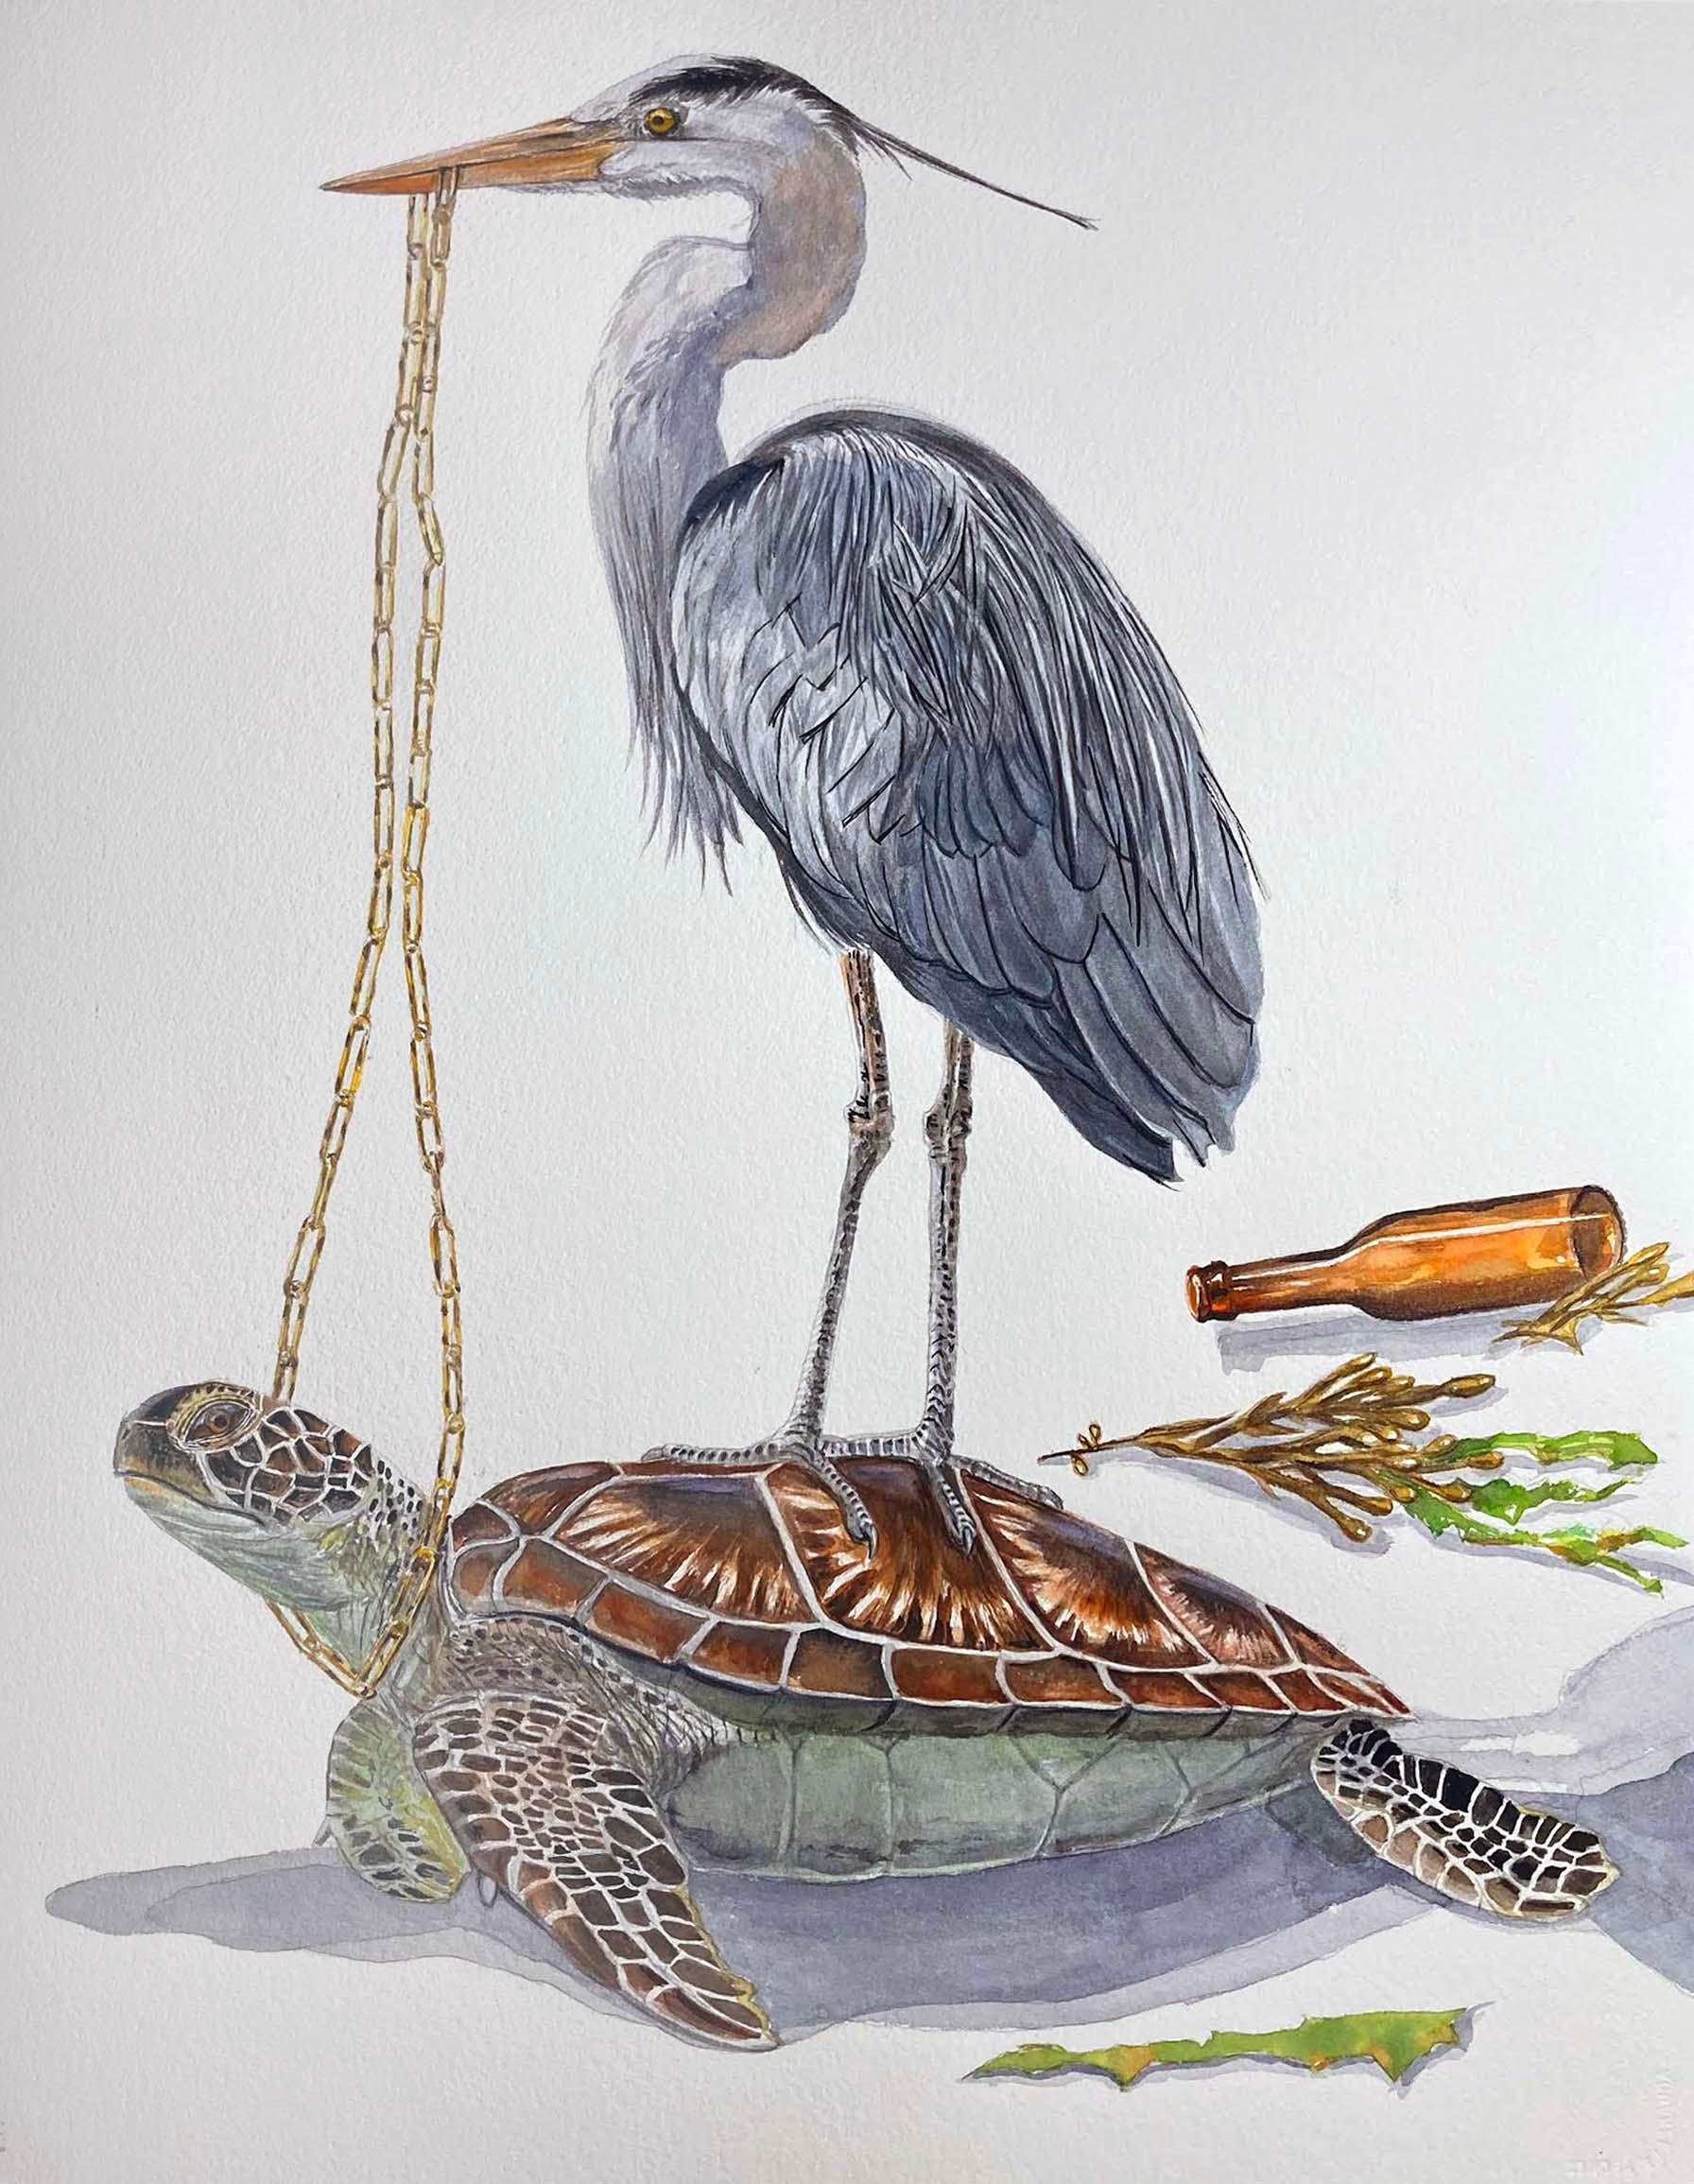 "The Golden Chain" contemporary surrealist animal painting, sea turtle and heron